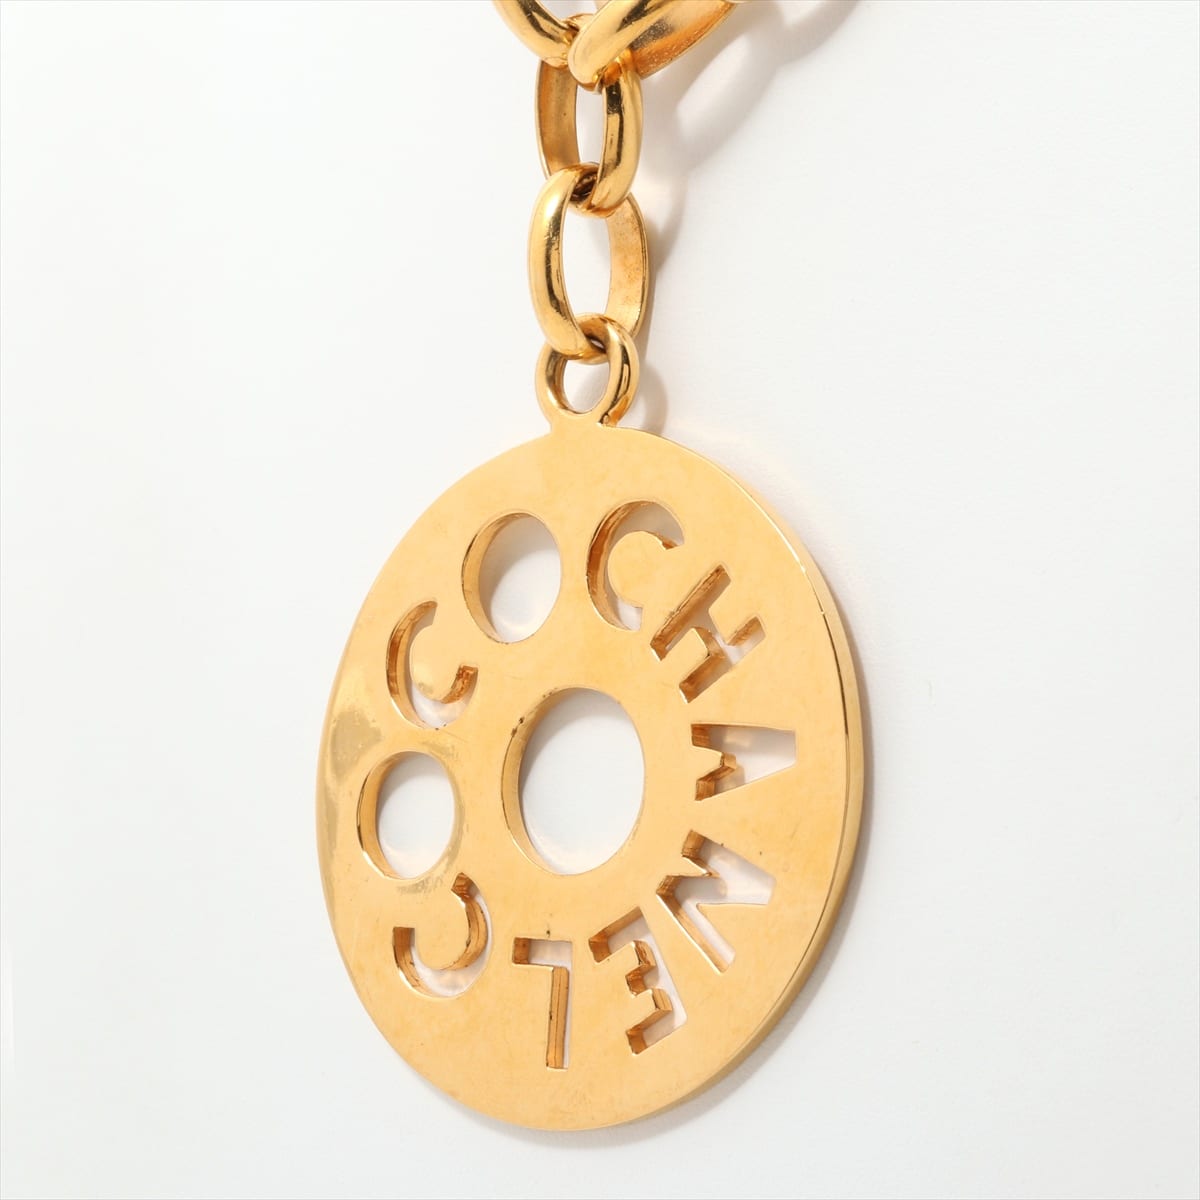 Chanel Necklace GP Gold plates